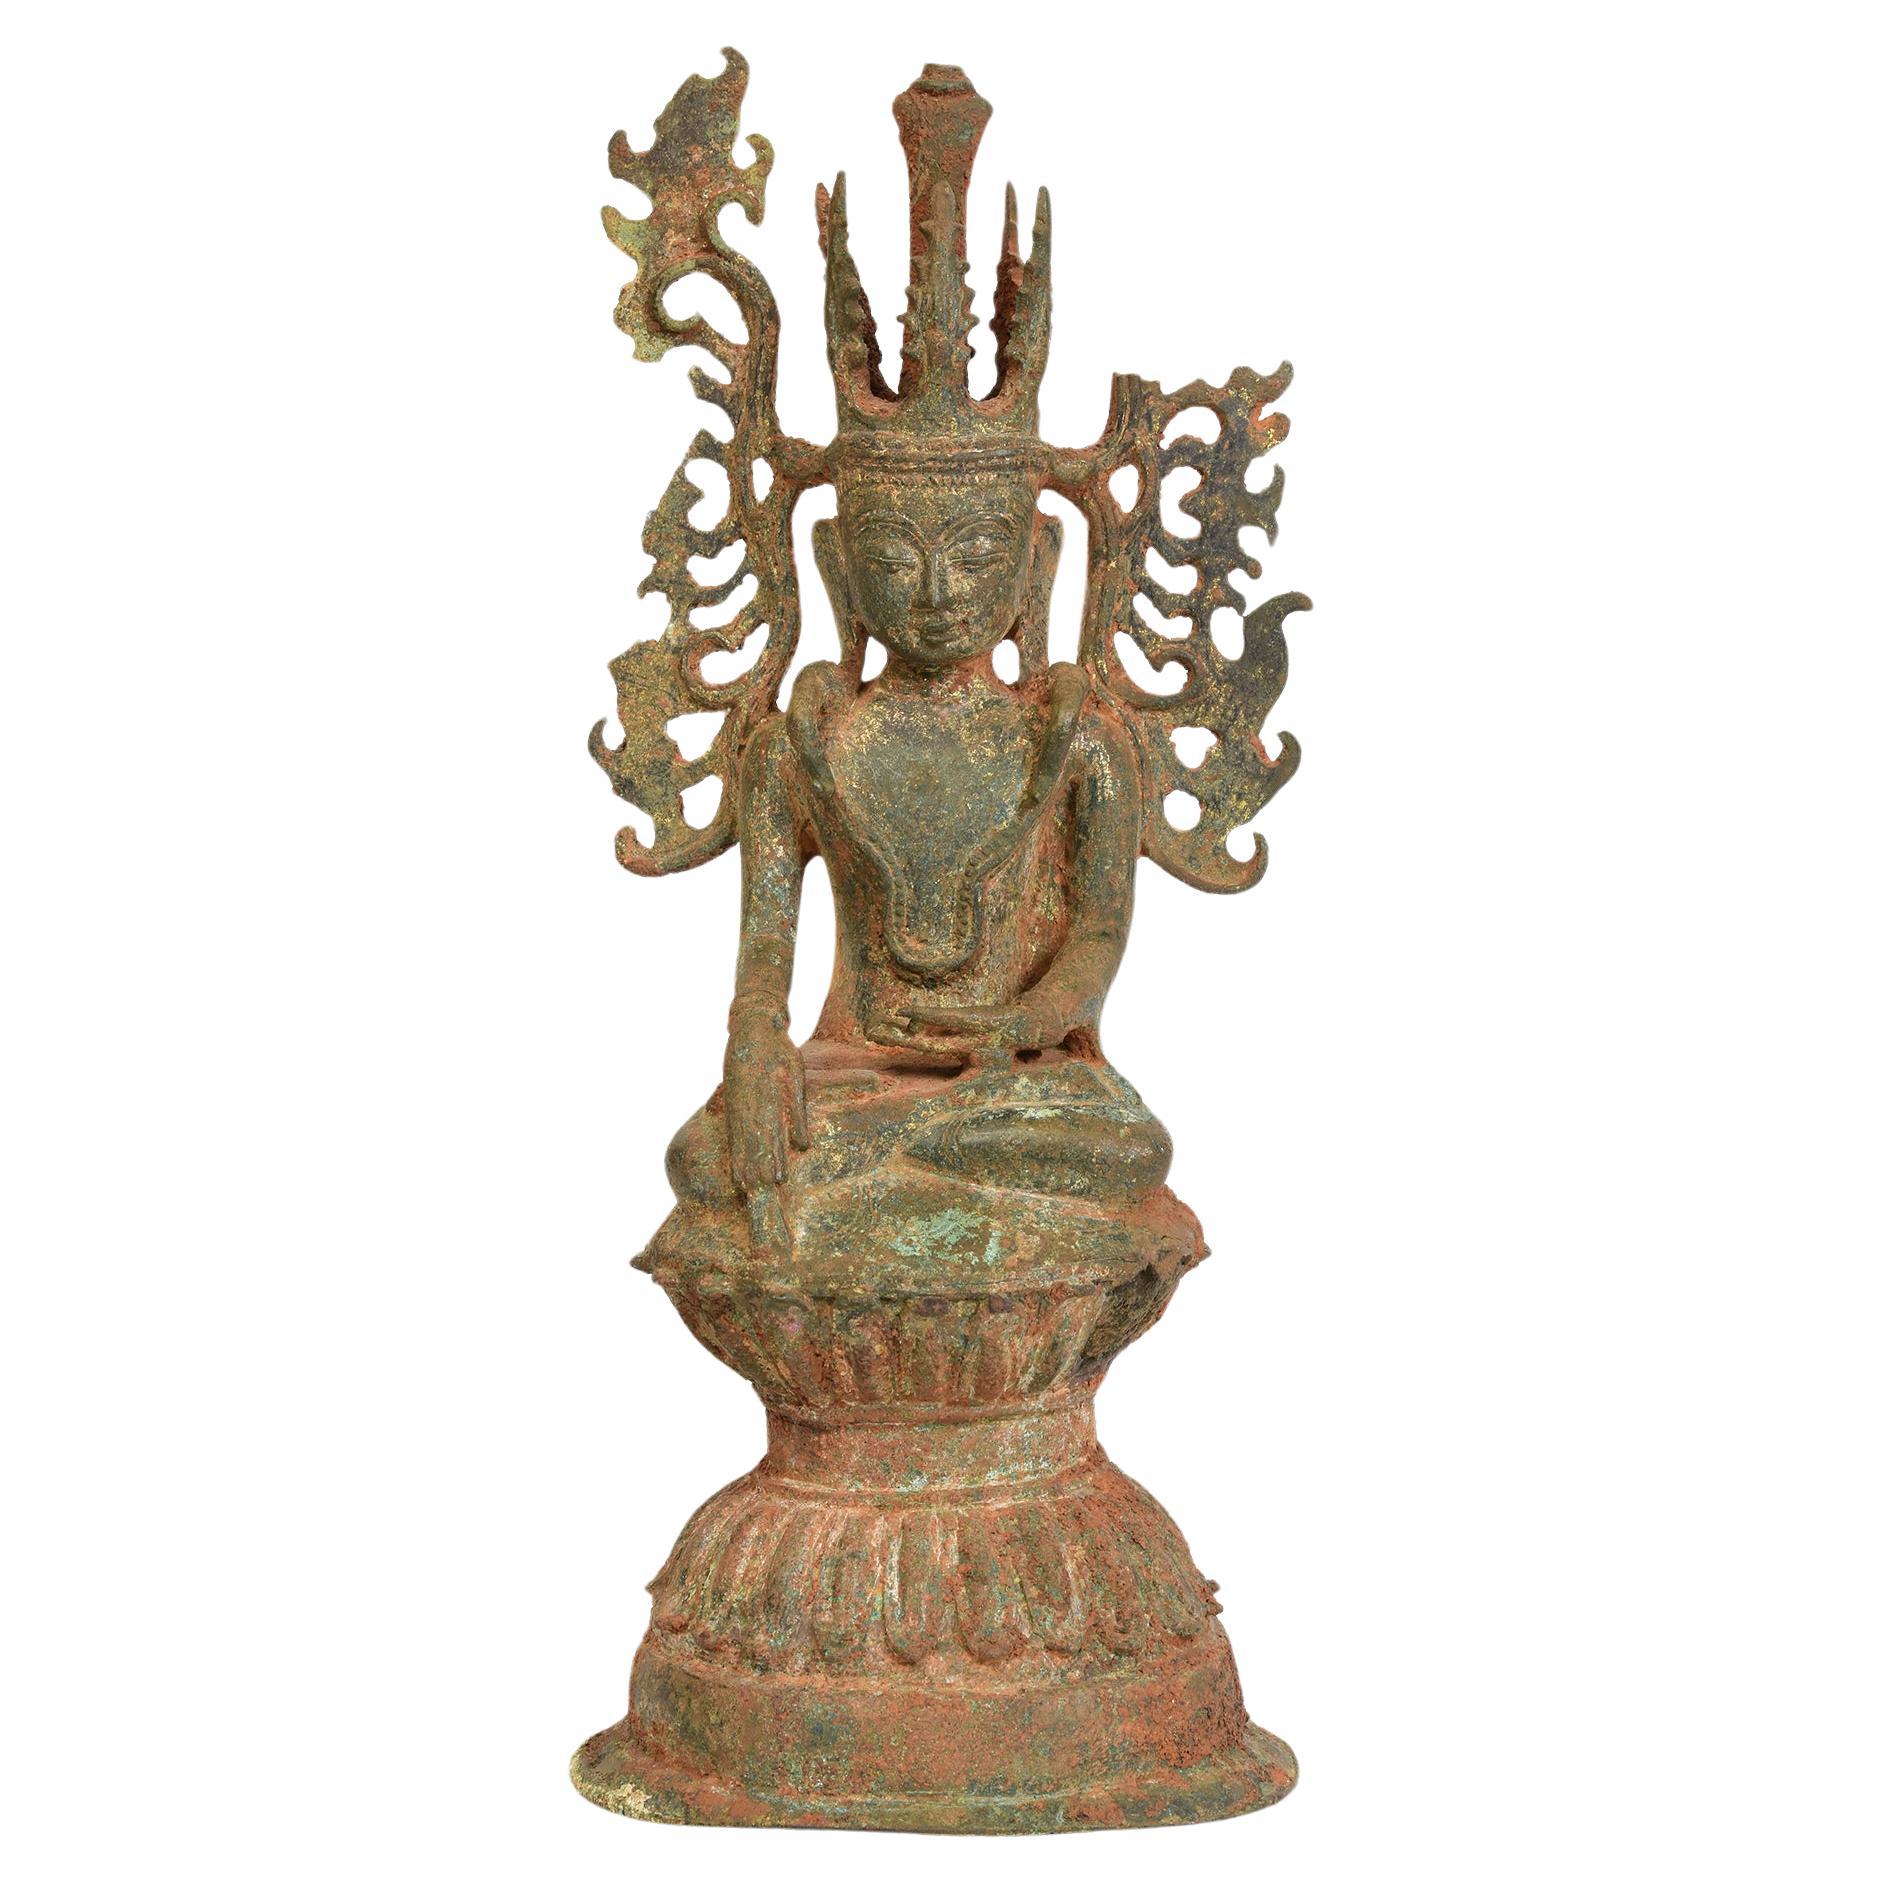 16th Century, Shan, Antique Burmese Bronze Seated King Crowned Buddha Statue For Sale